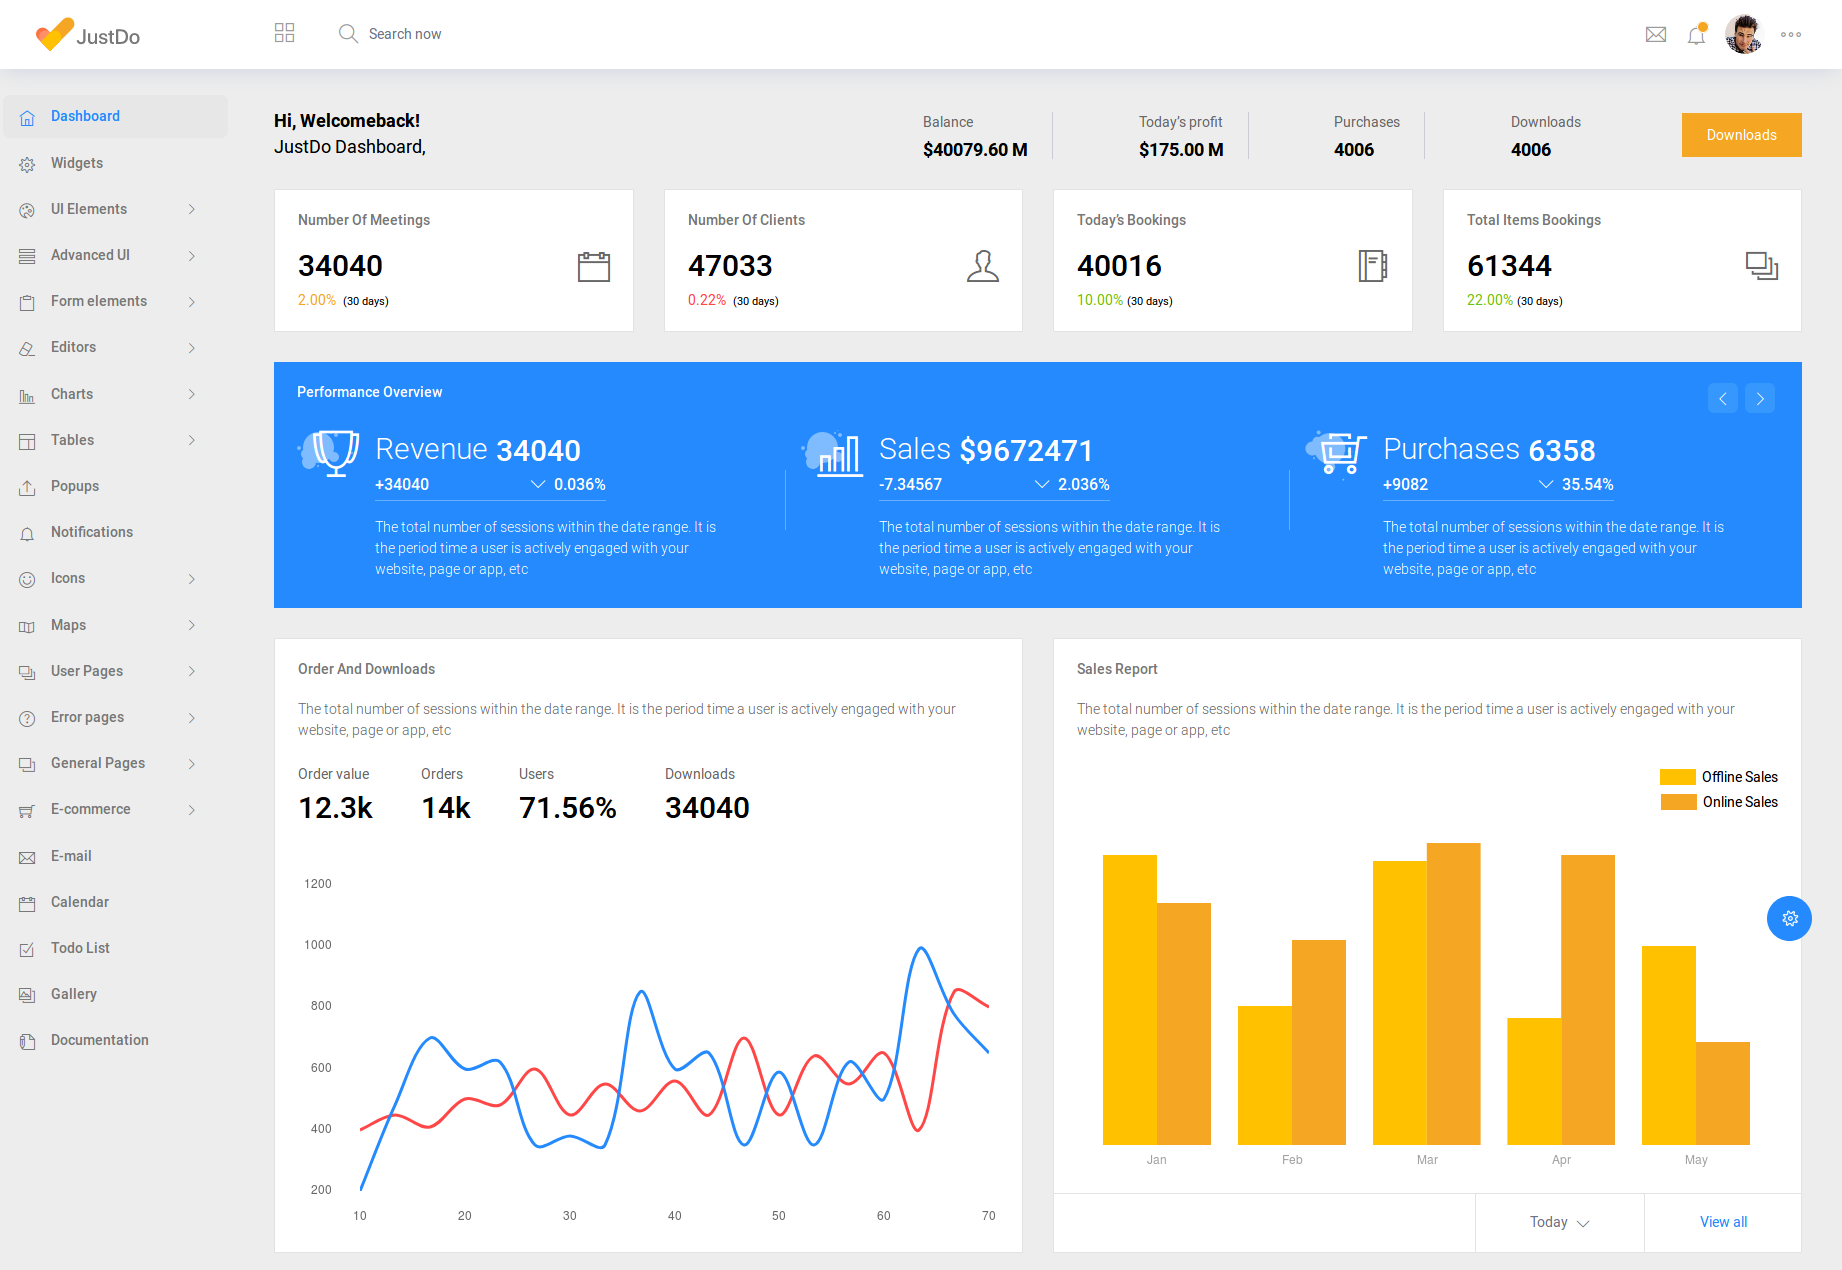 justdo is one of the best light Bootstrap dashboard template